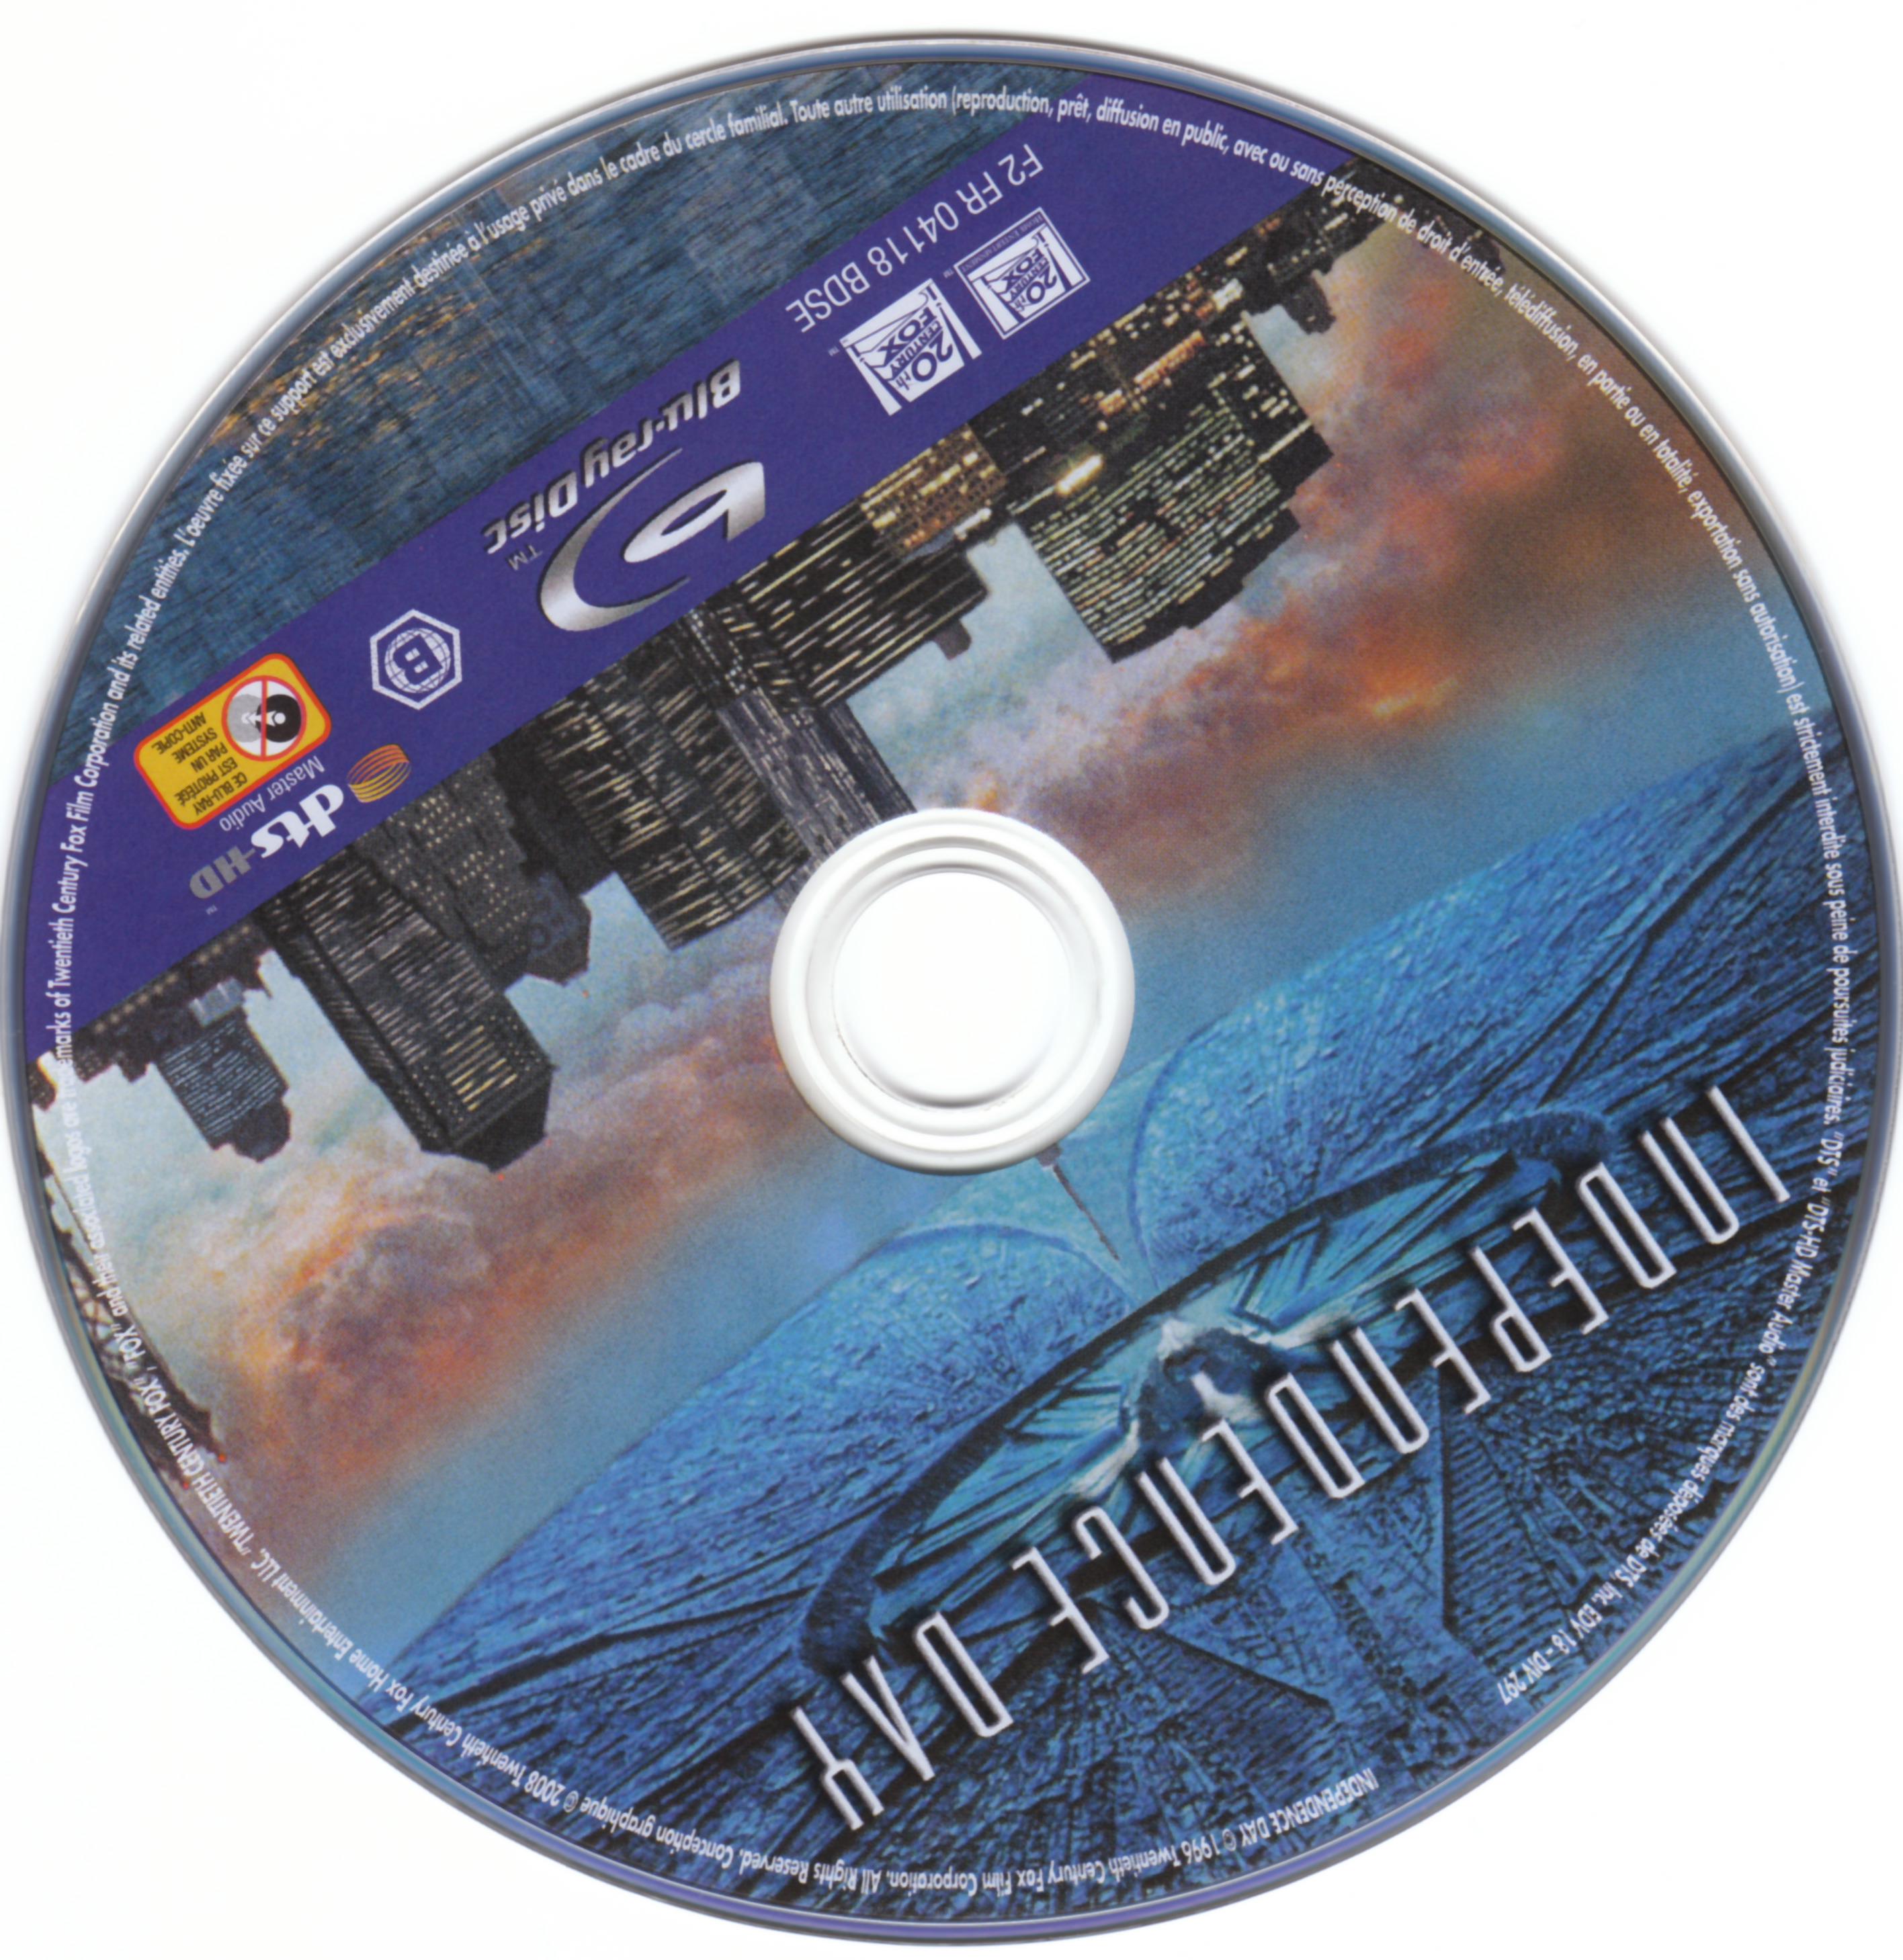 Independence day (BLU-RAY)